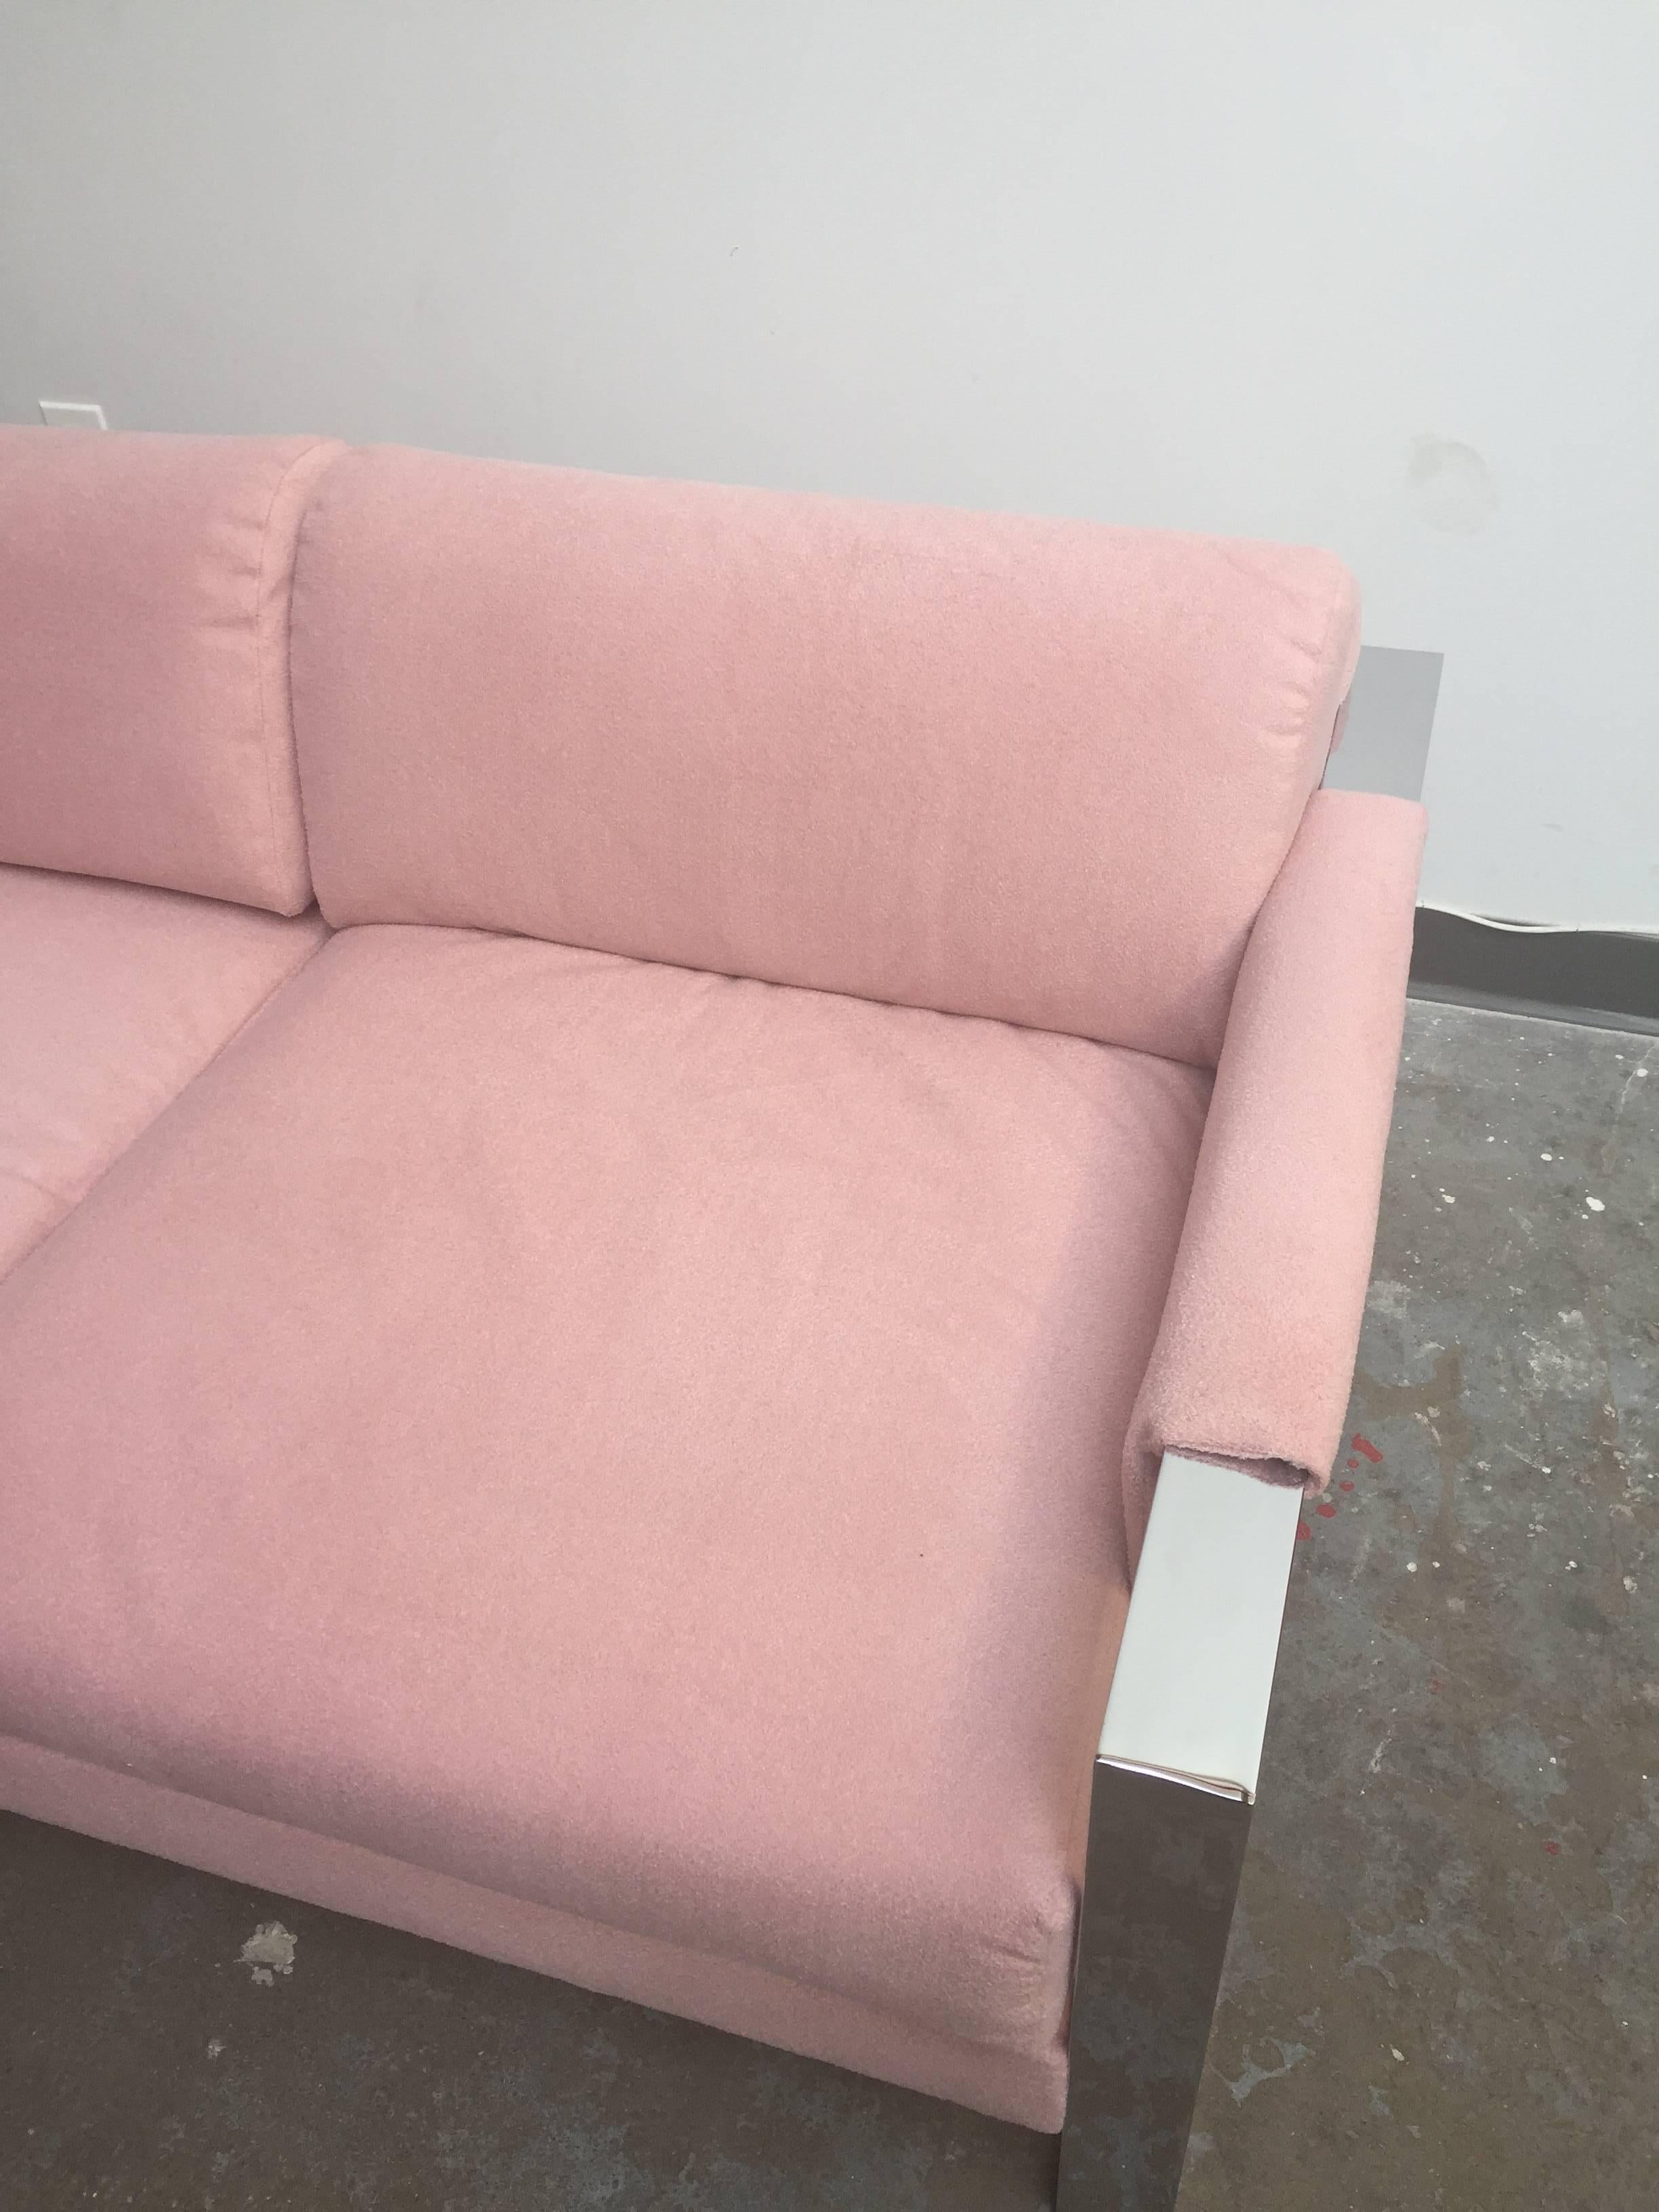 Loveseat with a new light pink fabric. Frame made of chrome and wood.